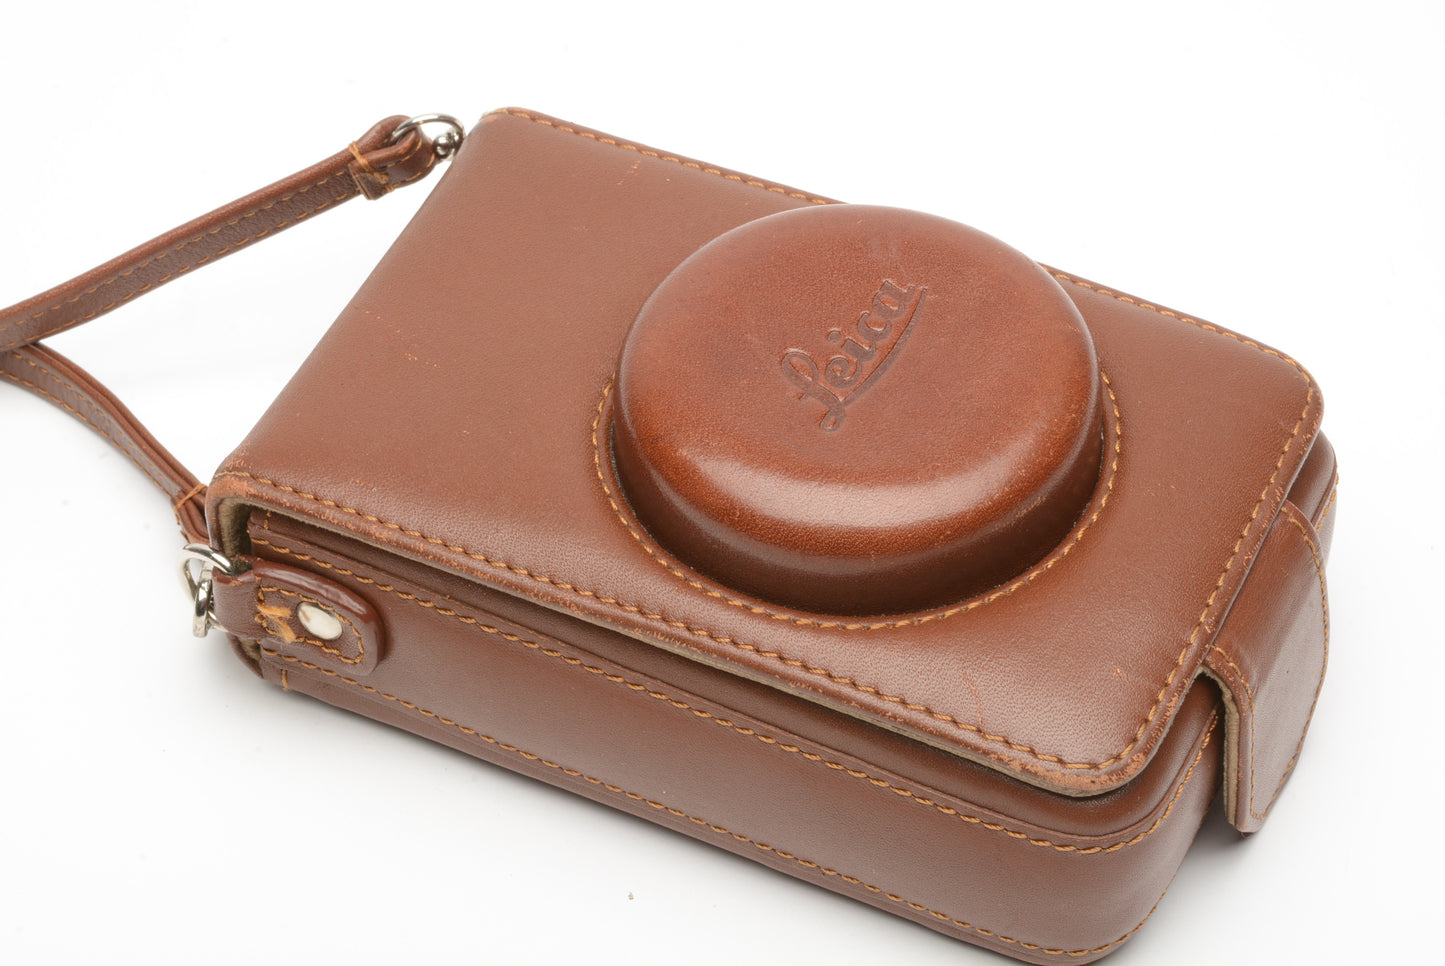 Leica leather D-Lux 4 Classic Case (Brown), very nice – RecycledPhoto